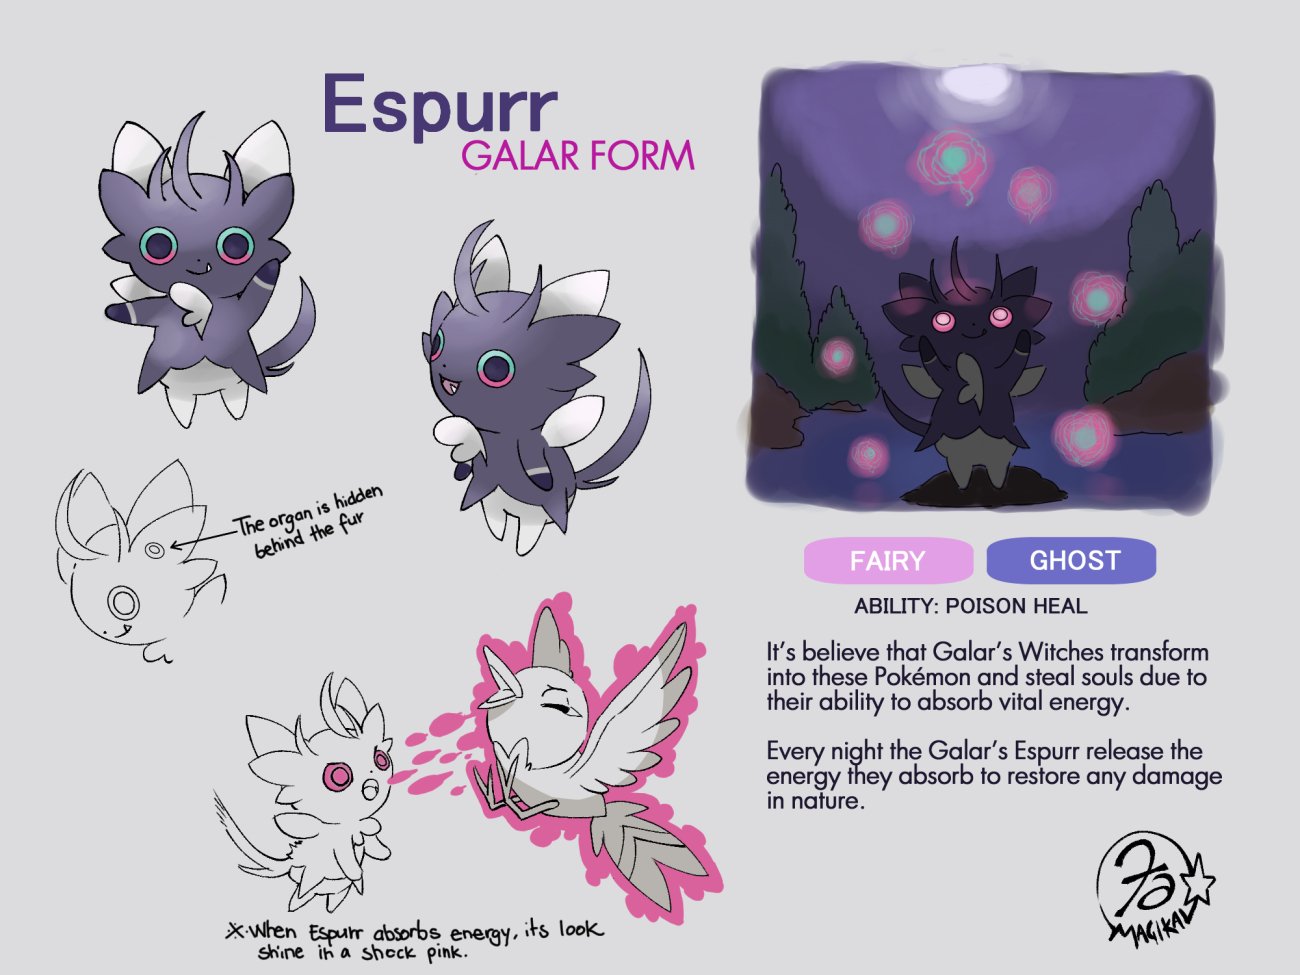 beløb Forbedring Produktionscenter Fa- 2022, Please don't be a sh_t on Twitter: "This Espurr it's my entry to  the #GalarFormContest by @PokeMigawari This tiny new friend was inspired by  the scotish folklore creature: Cait Sith :).